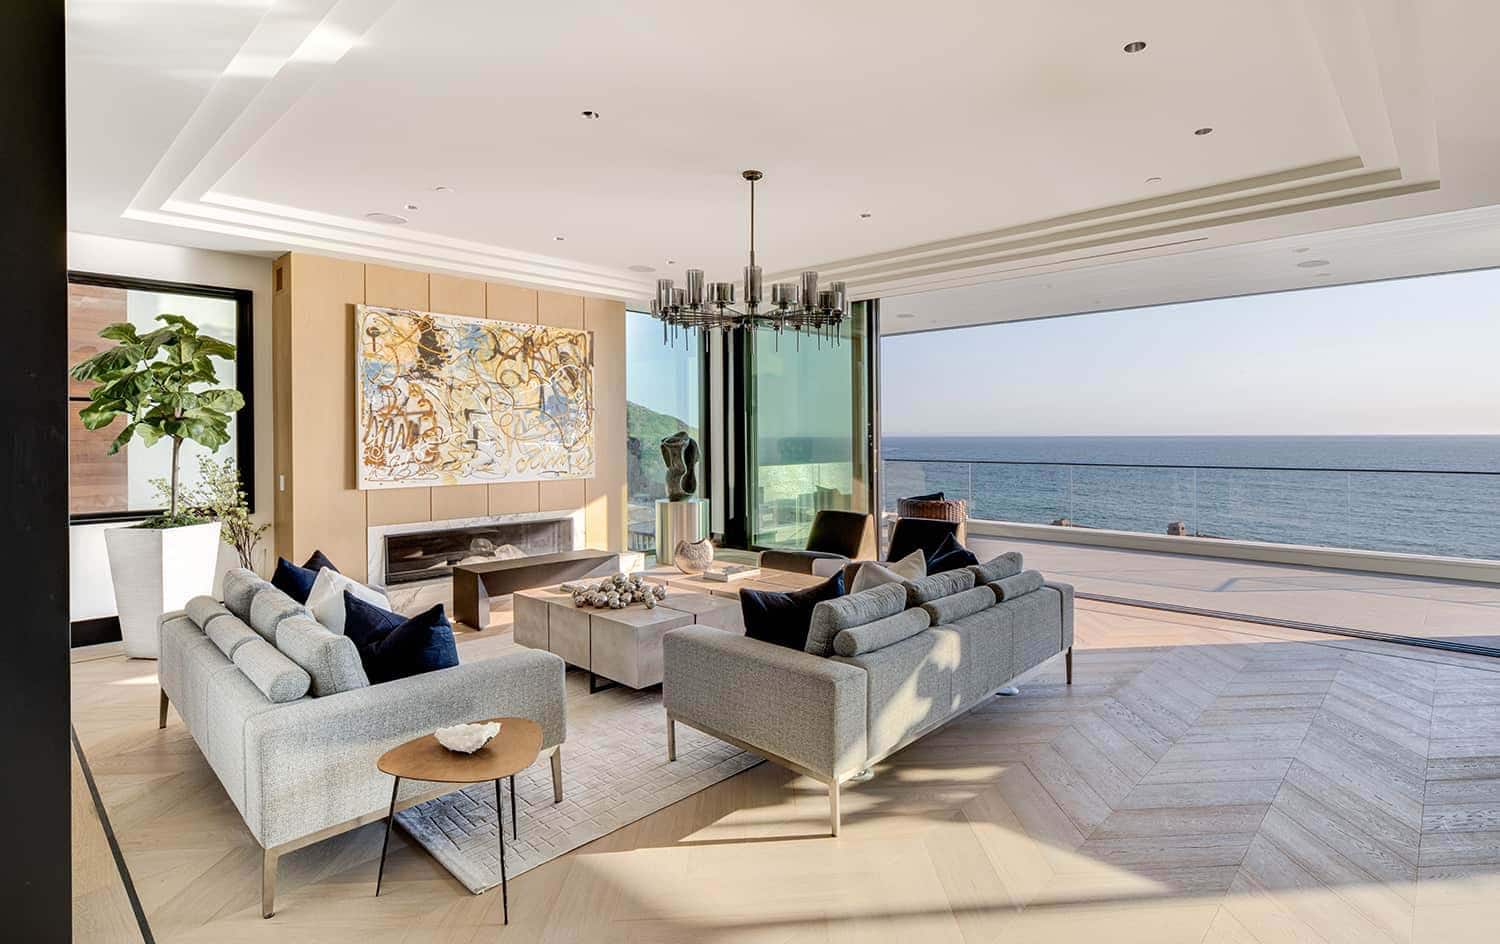 coastal contemporary living room with a sliding glass door that opens to the ocean